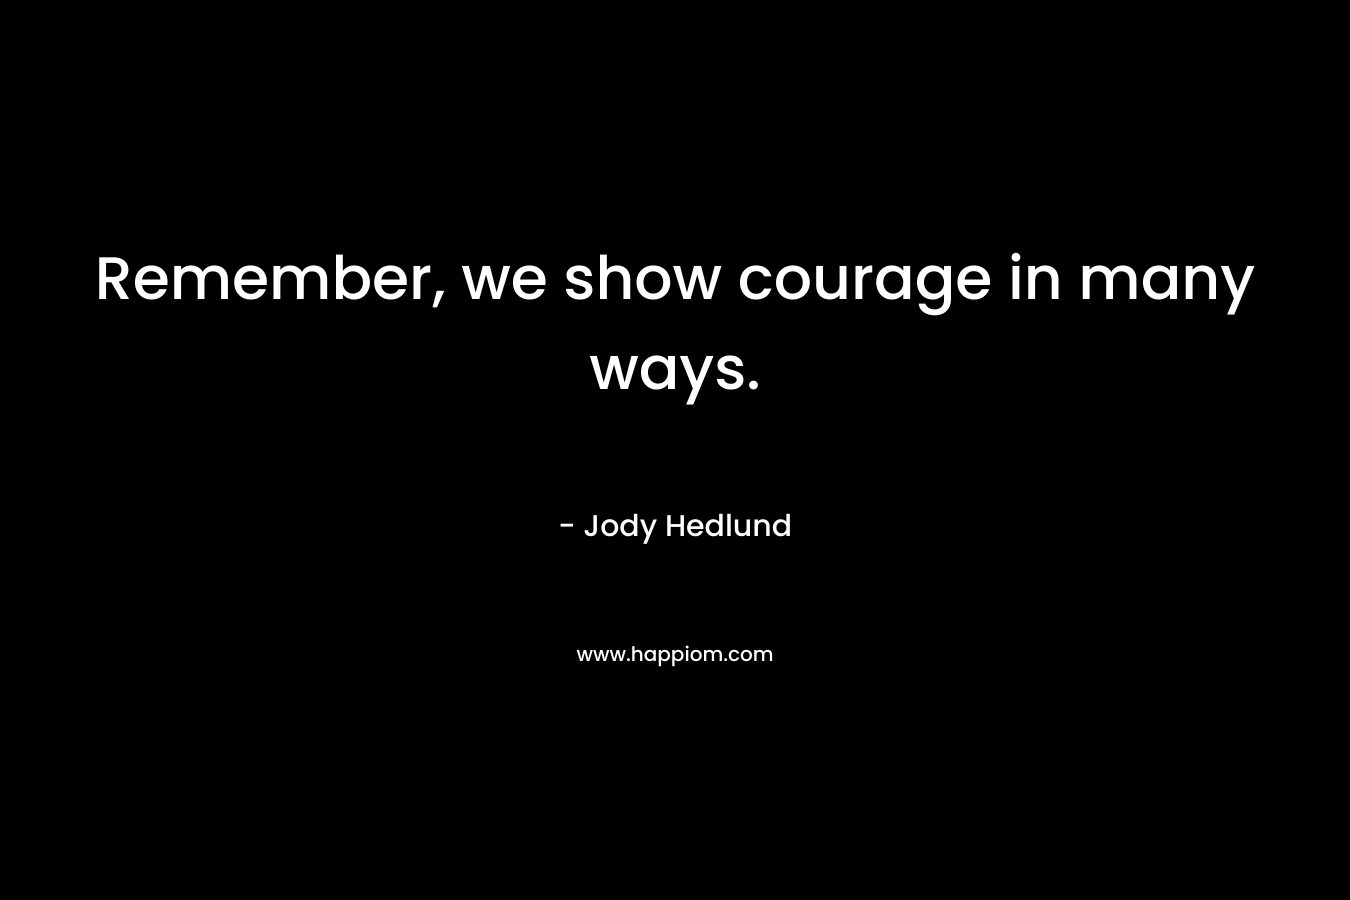 Remember, we show courage in many ways.